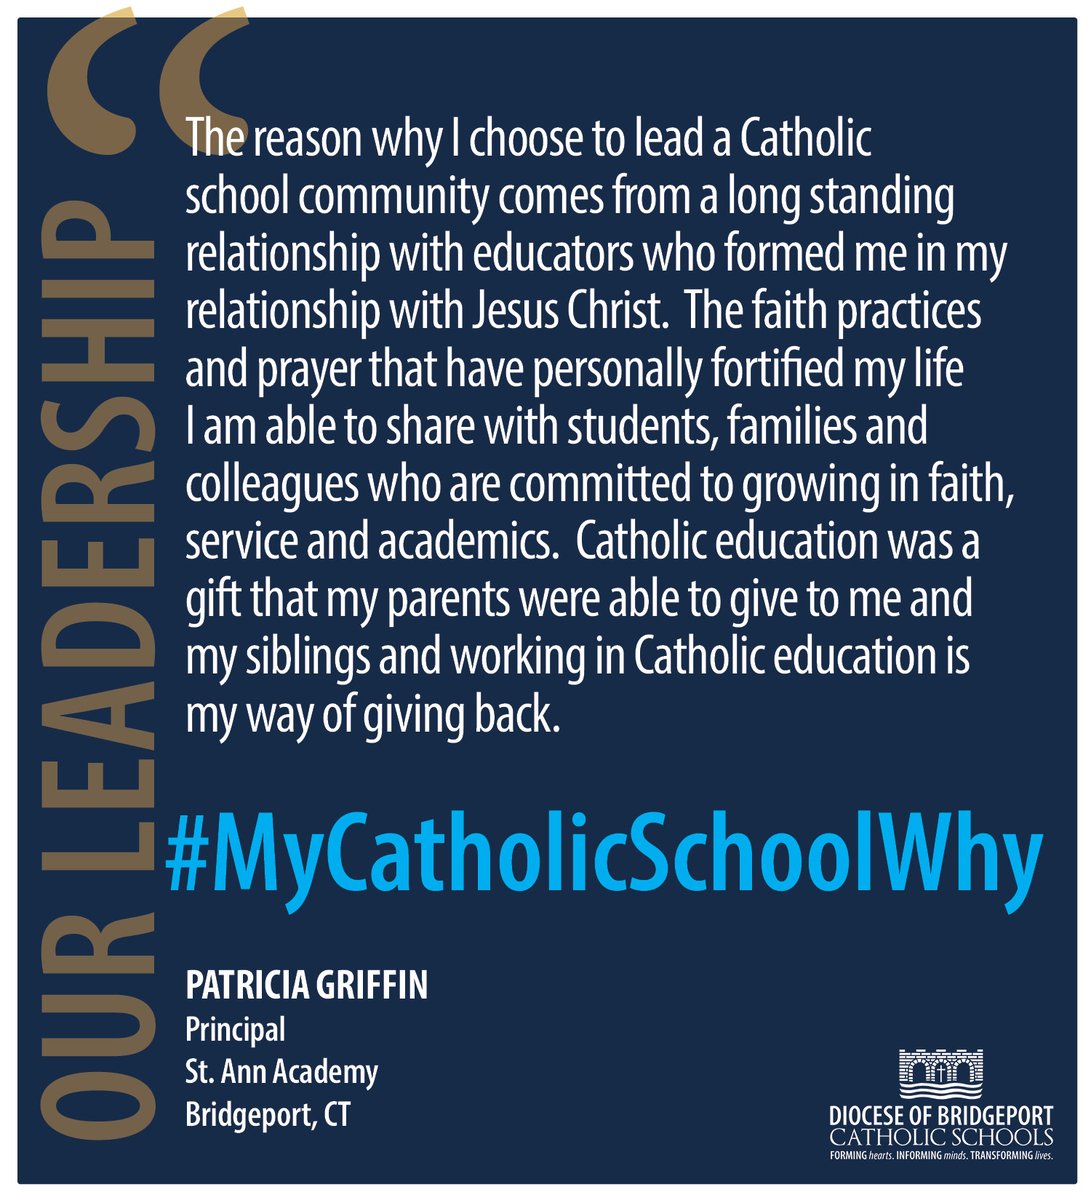 test Twitter Media - Thank you, Pat Griffin, Principal at St. Ann Academy, #Bridgeport for choosing us. We are so grateful to you! #mycatholicschoolwhy 💙 @CA_Bridgeport @Diobpt @BptSup @CathStandard @CathSchoolNews @NCEATALK https://t.co/w4RPPVGM9a